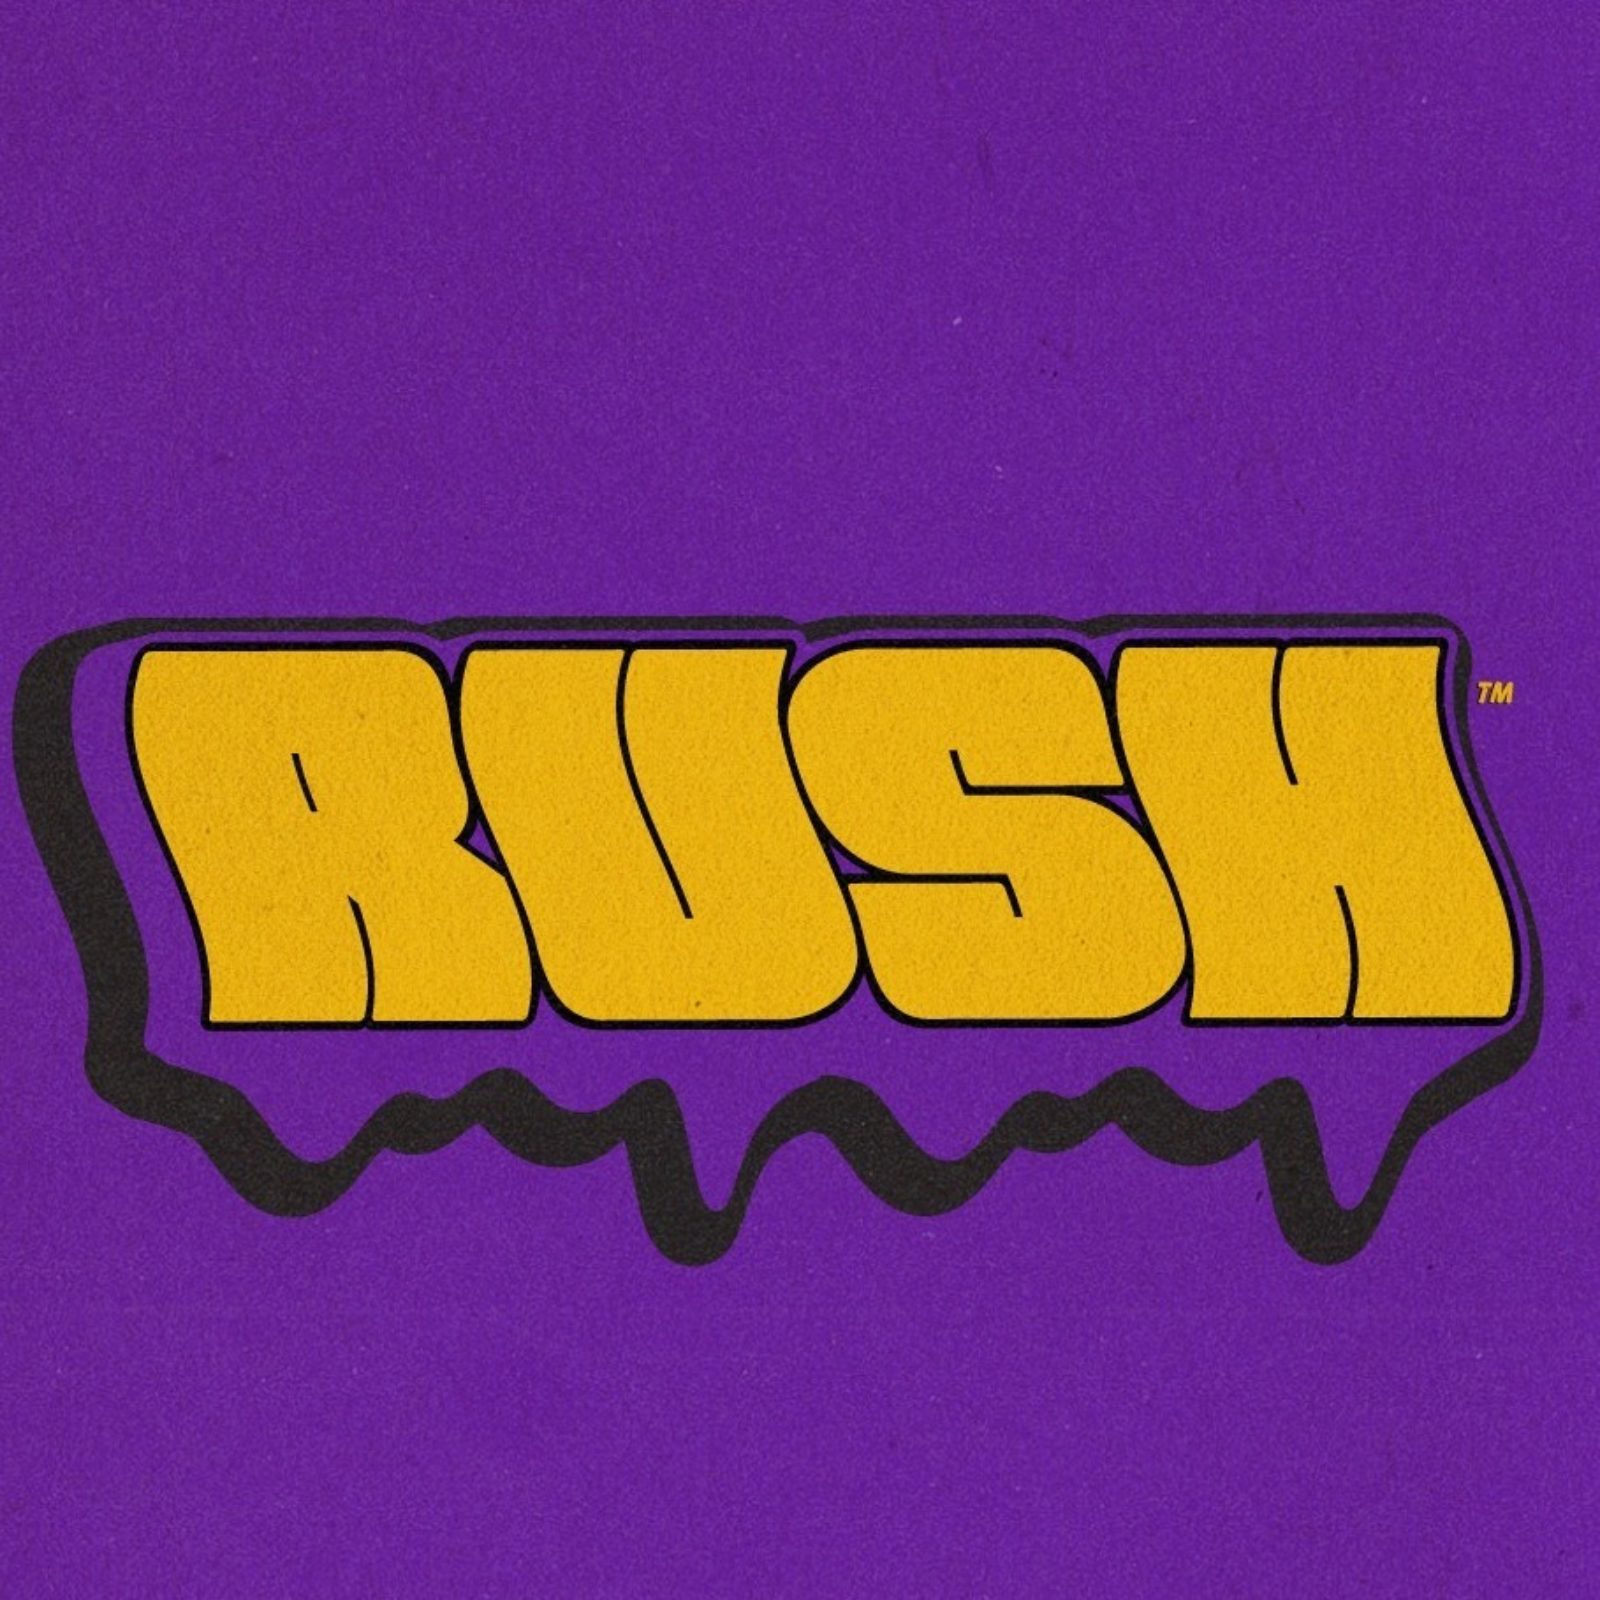 RUSH - Bash Man & Mi$$ Co$mix all night! (LIMITED FREE BEFORE MIDNIGHT TICKETS)